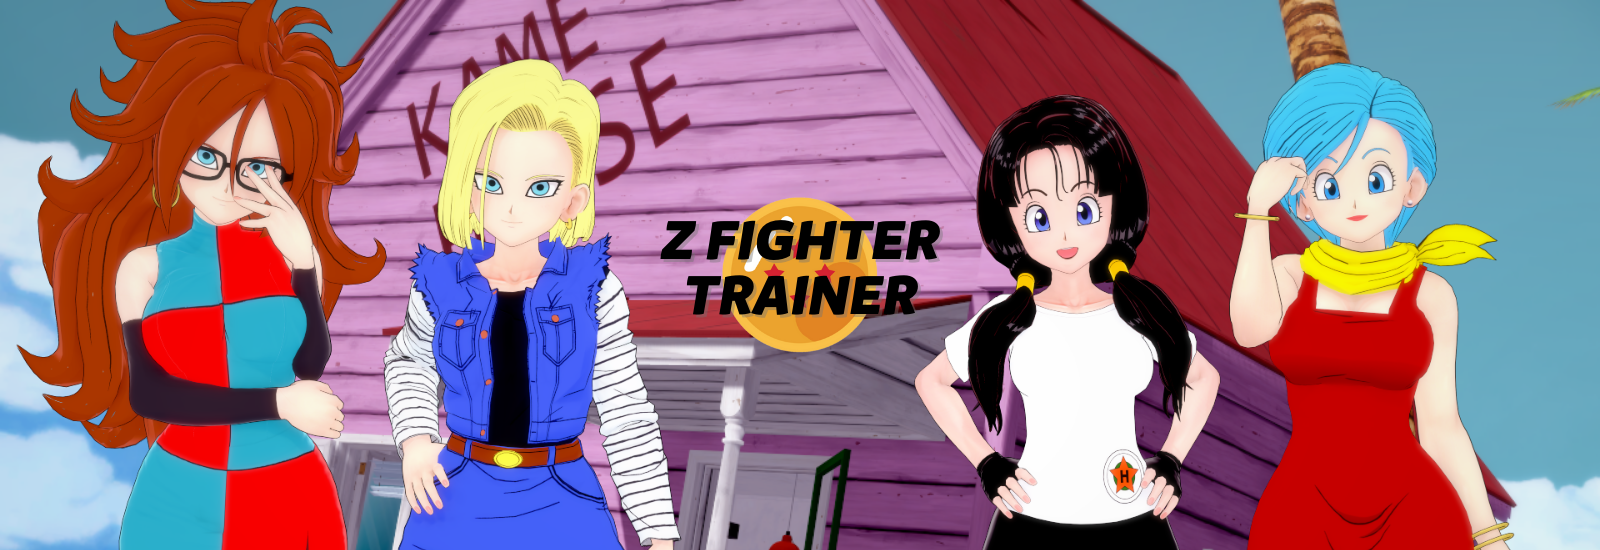 Z Fighter Trainer1.png